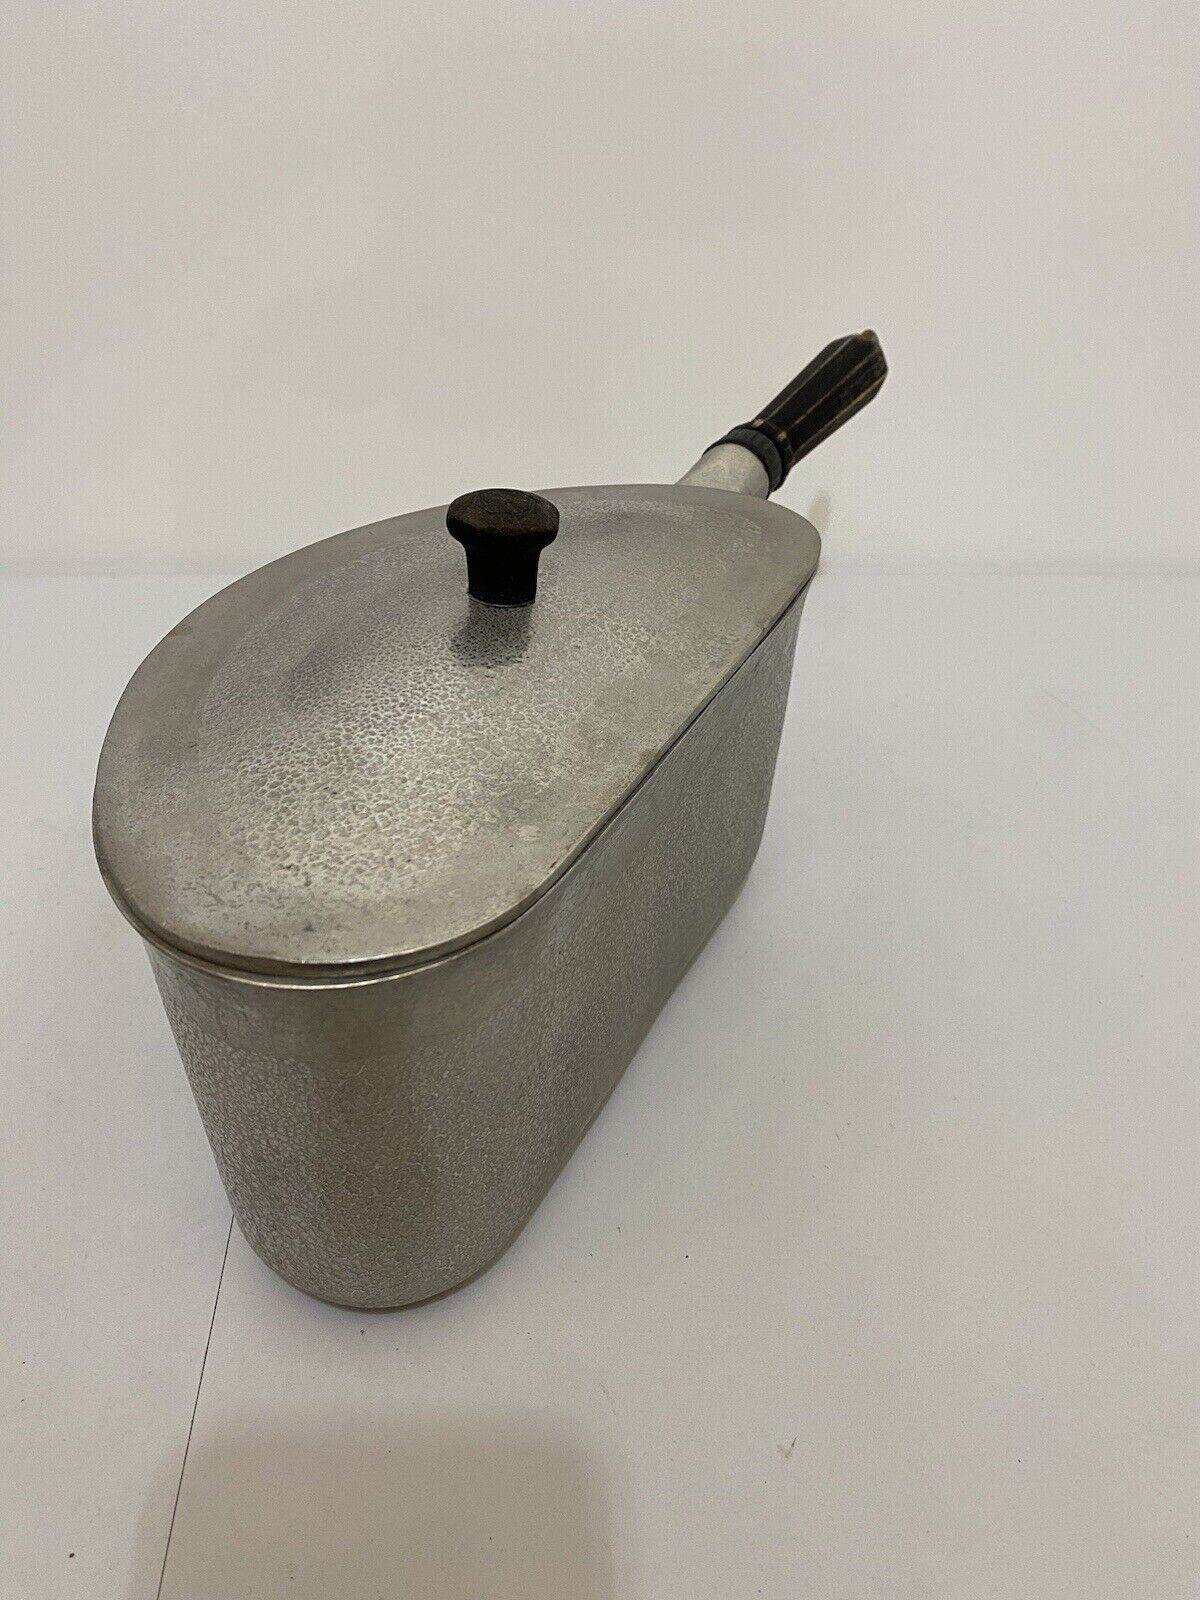 Vintage THERM-O-CRAFT Half Pot With Lid Textured Aluminum Wood Handle